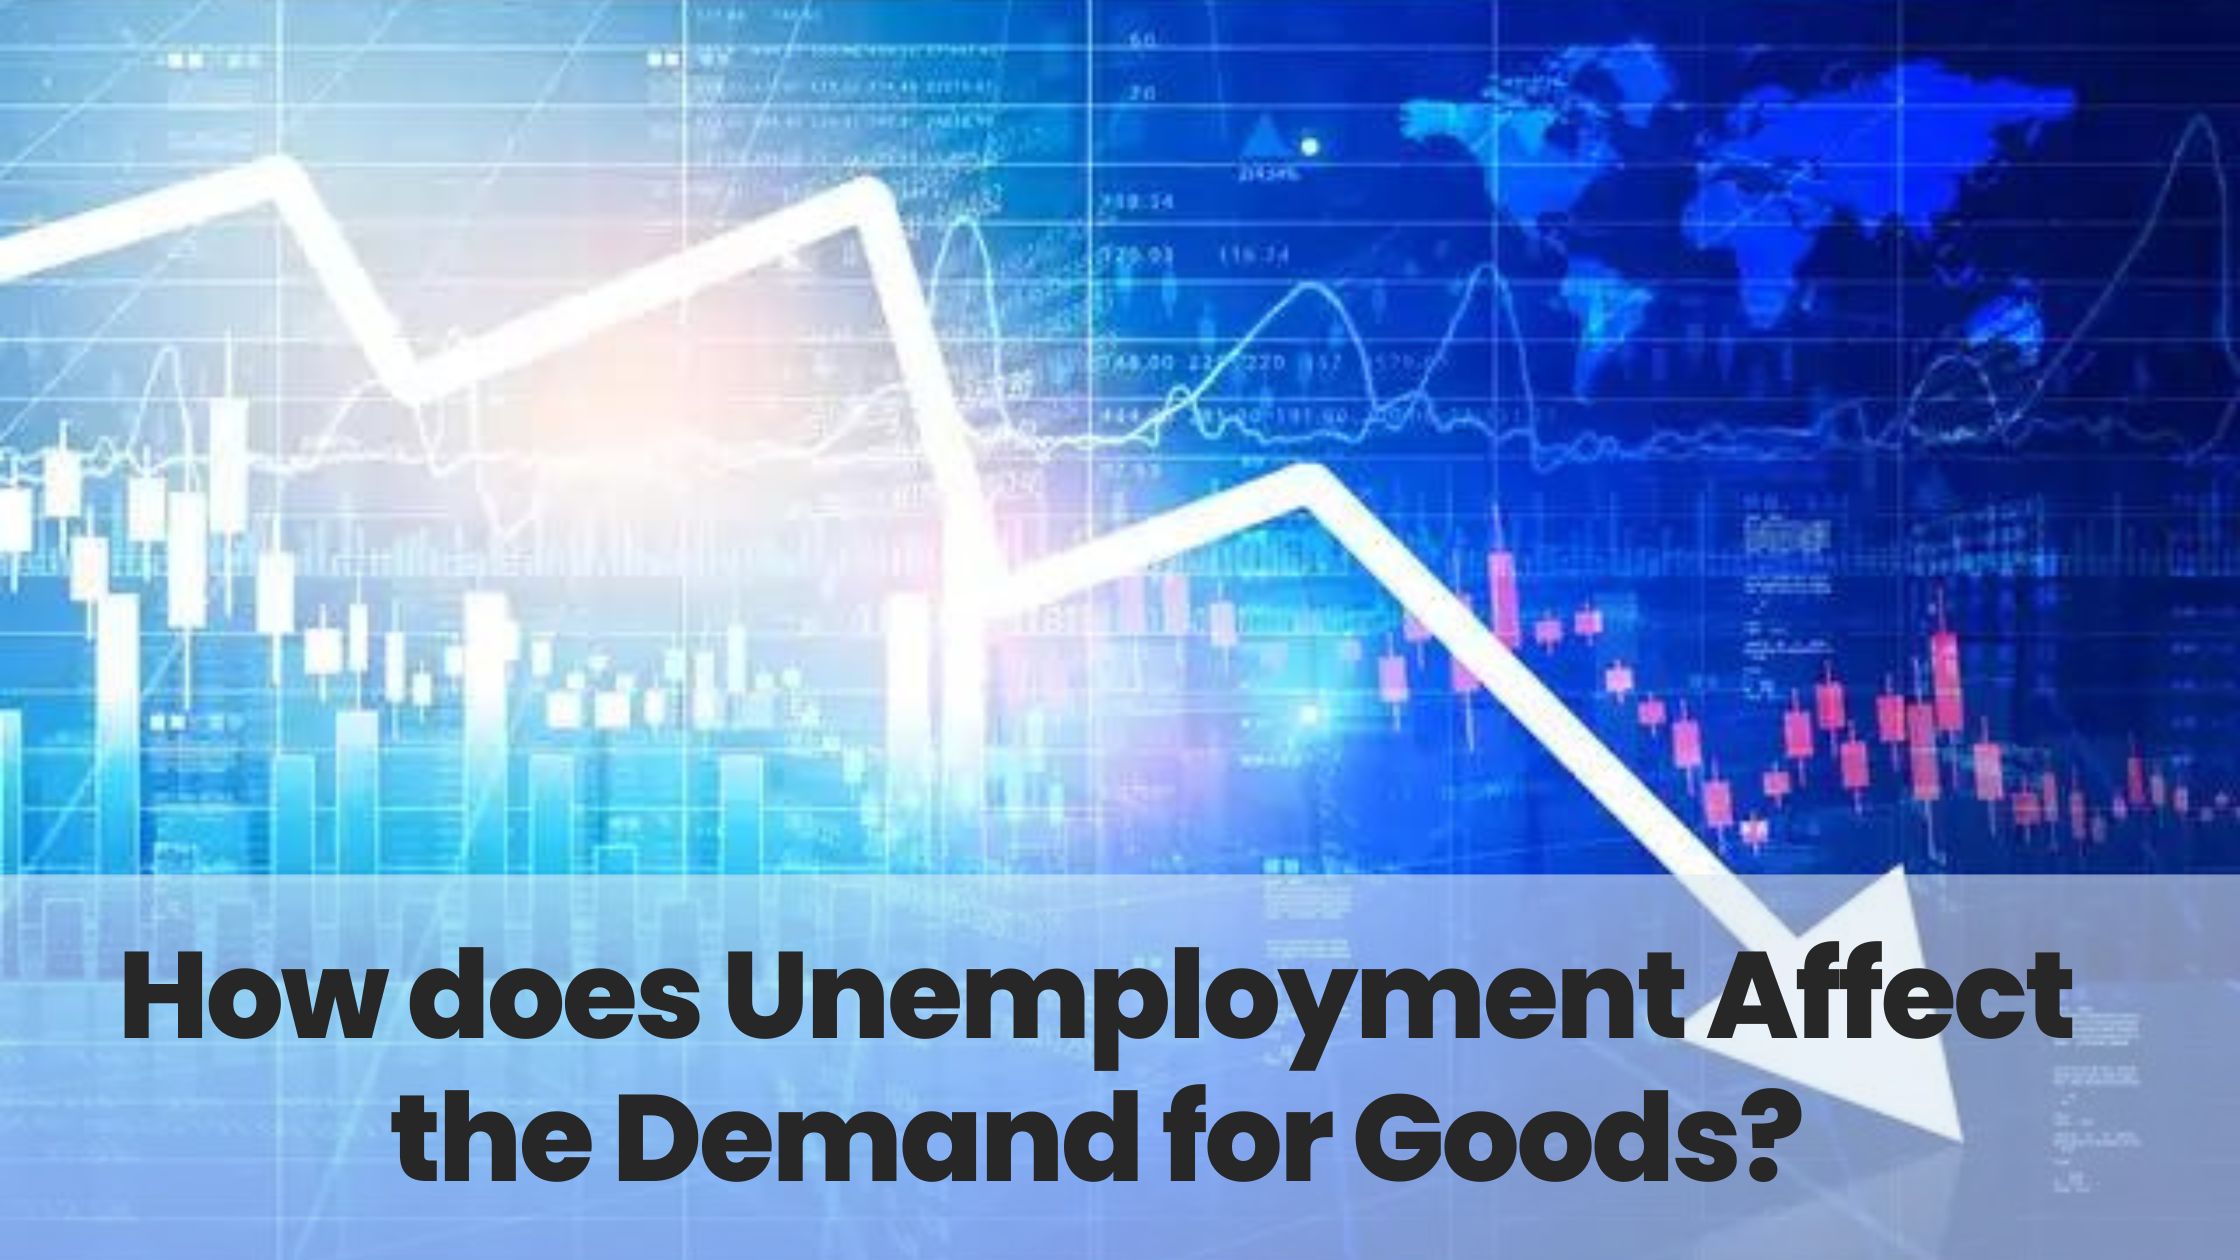 How does Unemployment Affect the Demand for Goods?